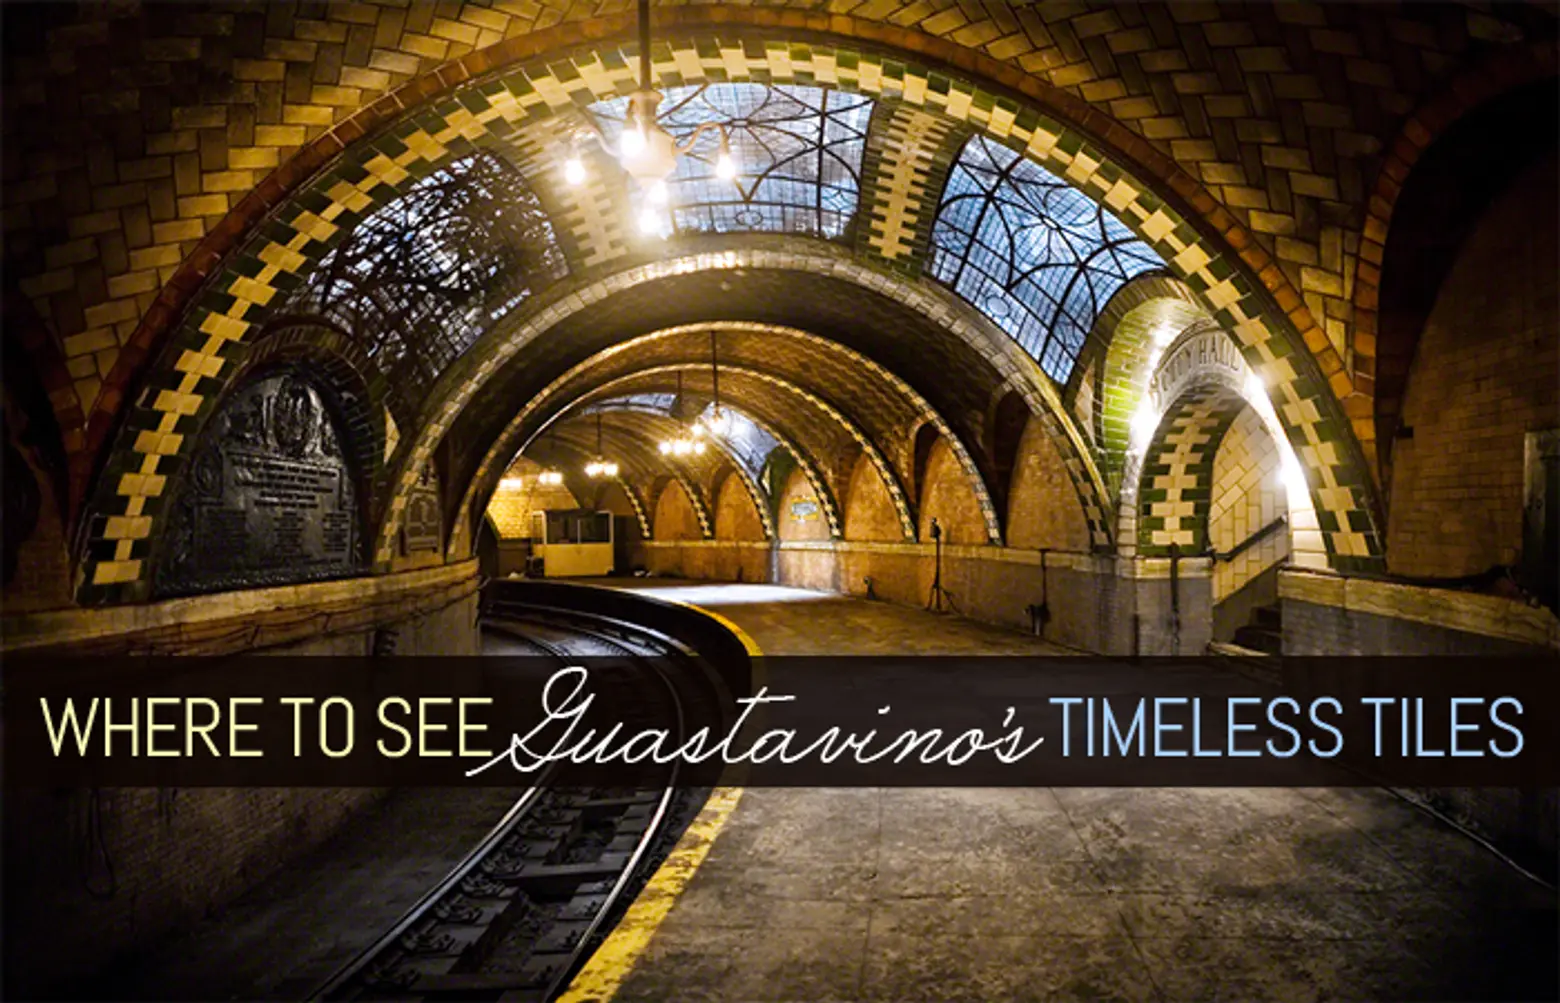 Palaces for the People: Where to See the Timeless Tiled Works of Guastavino in NYC